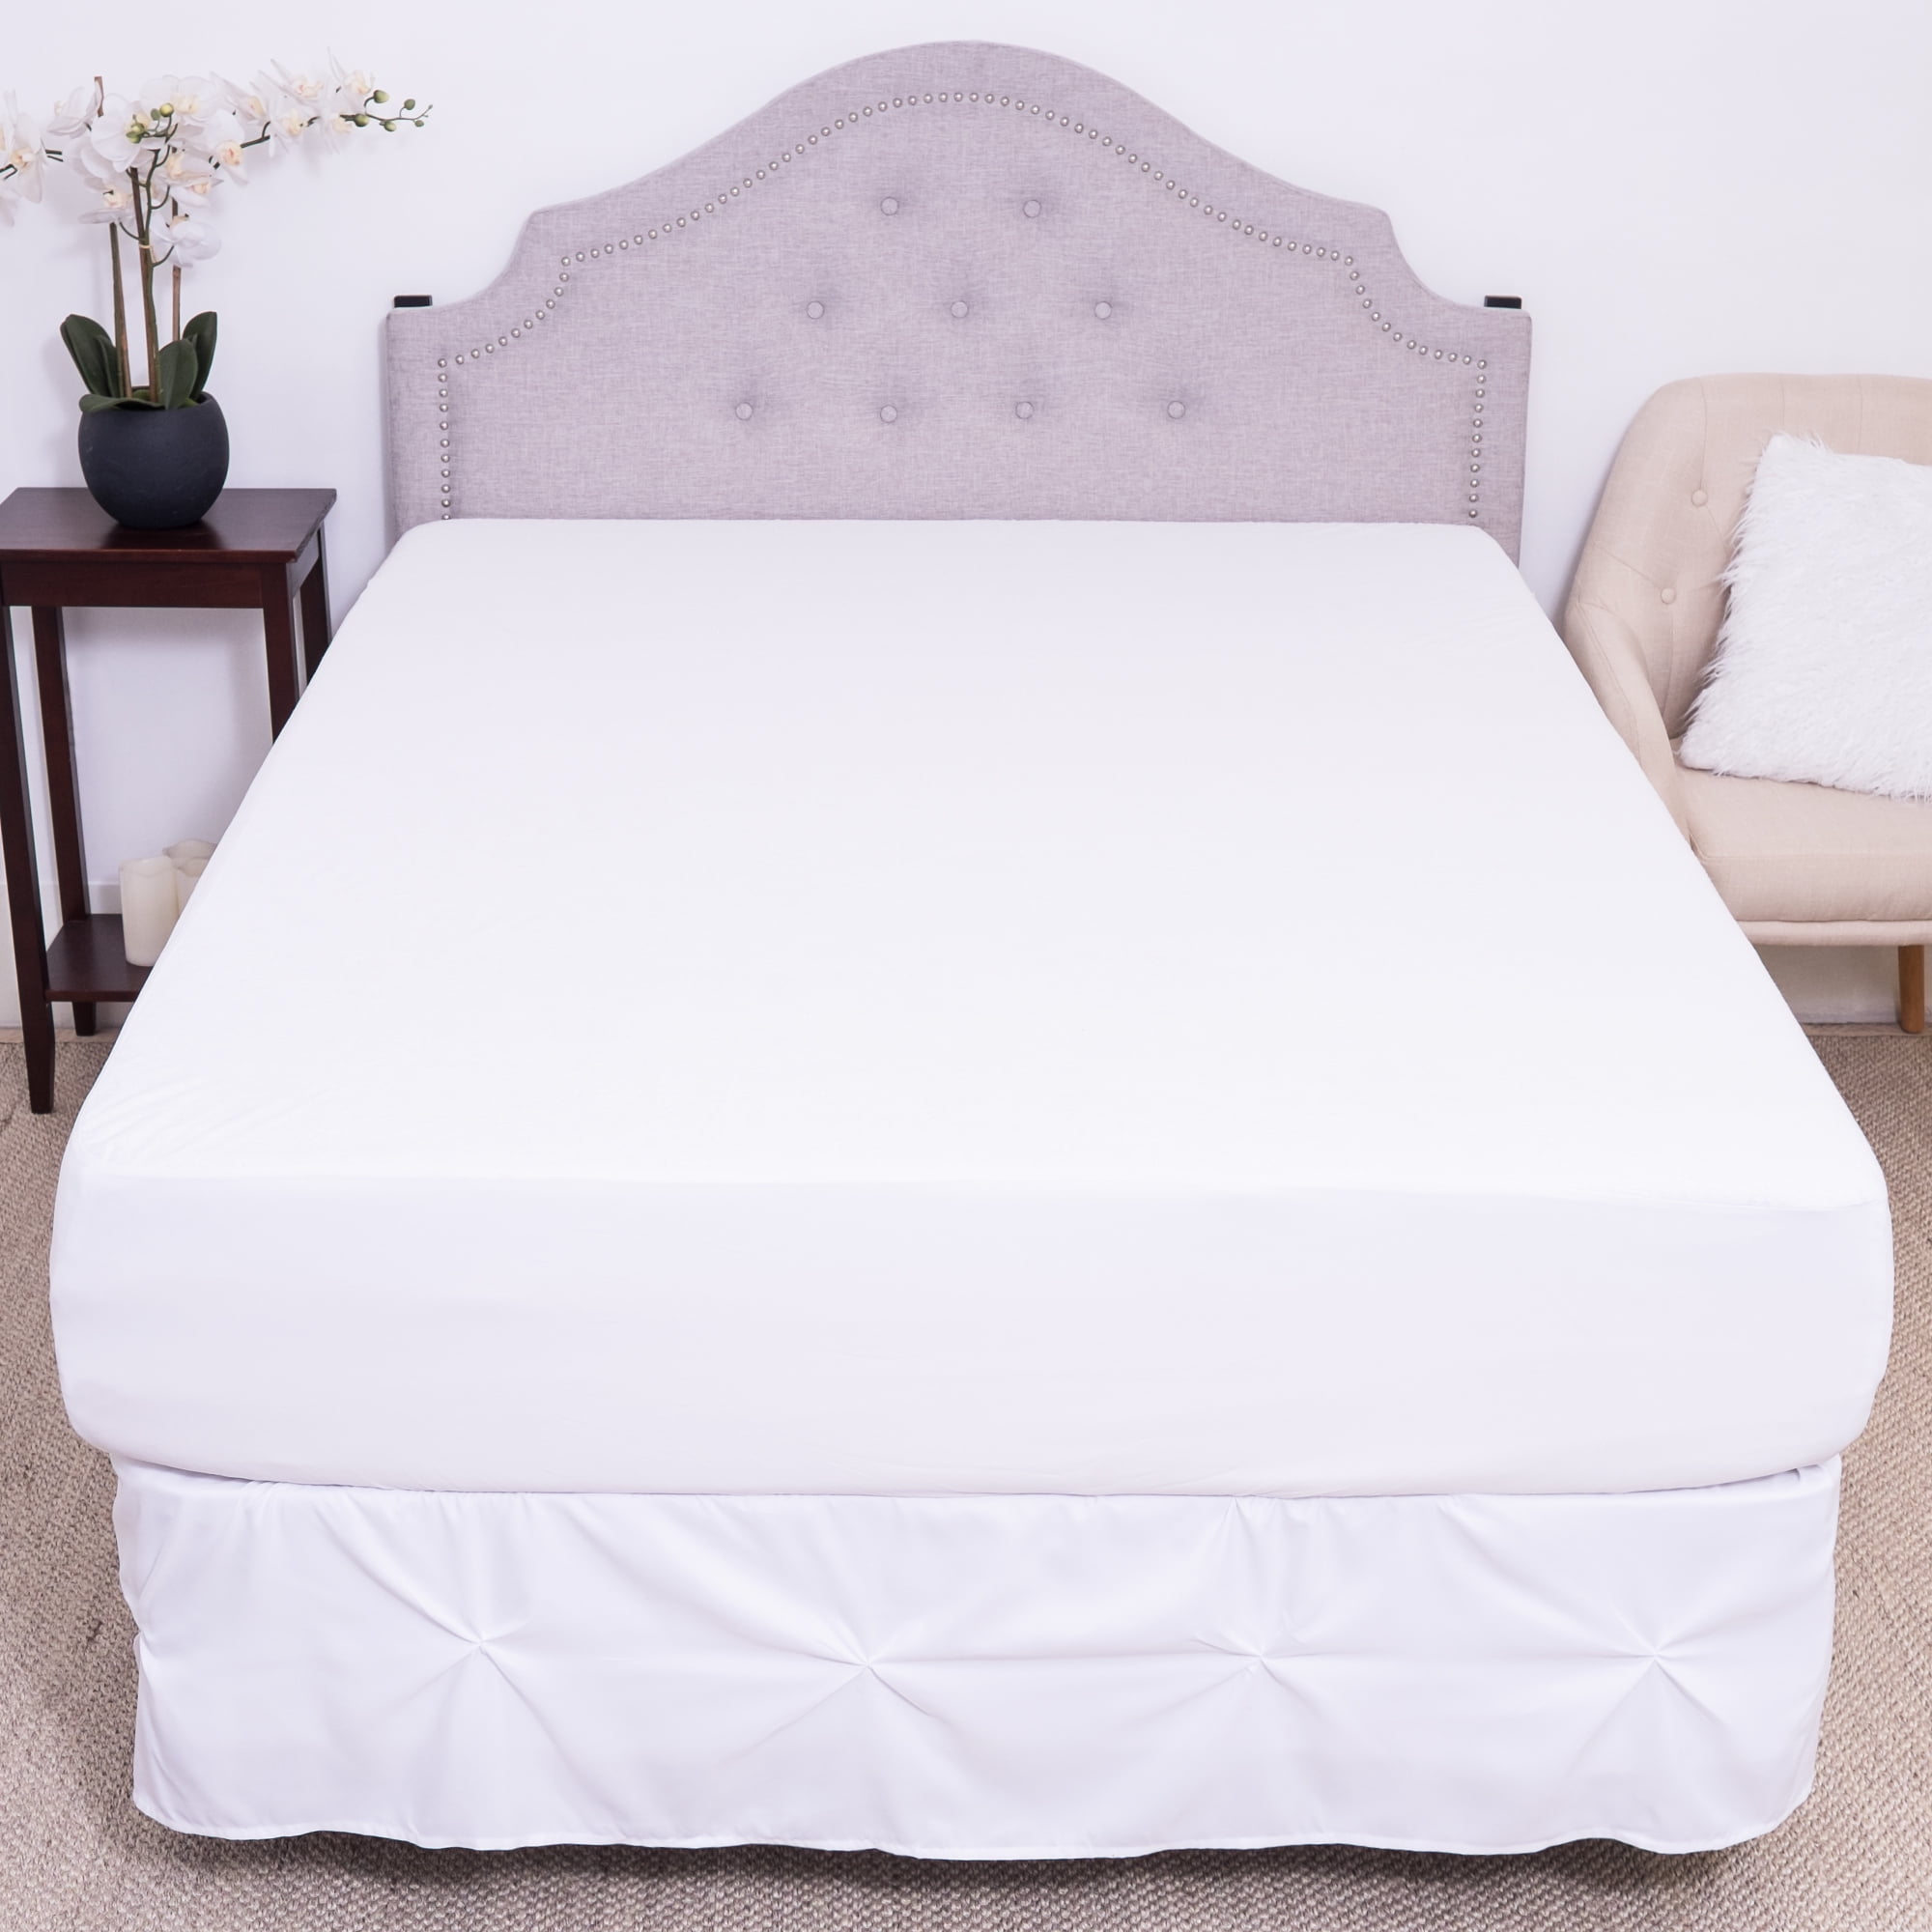 Terry Towel Mattress Protector Showerproof Fitted Sheet Bed Cover All Sizes New 